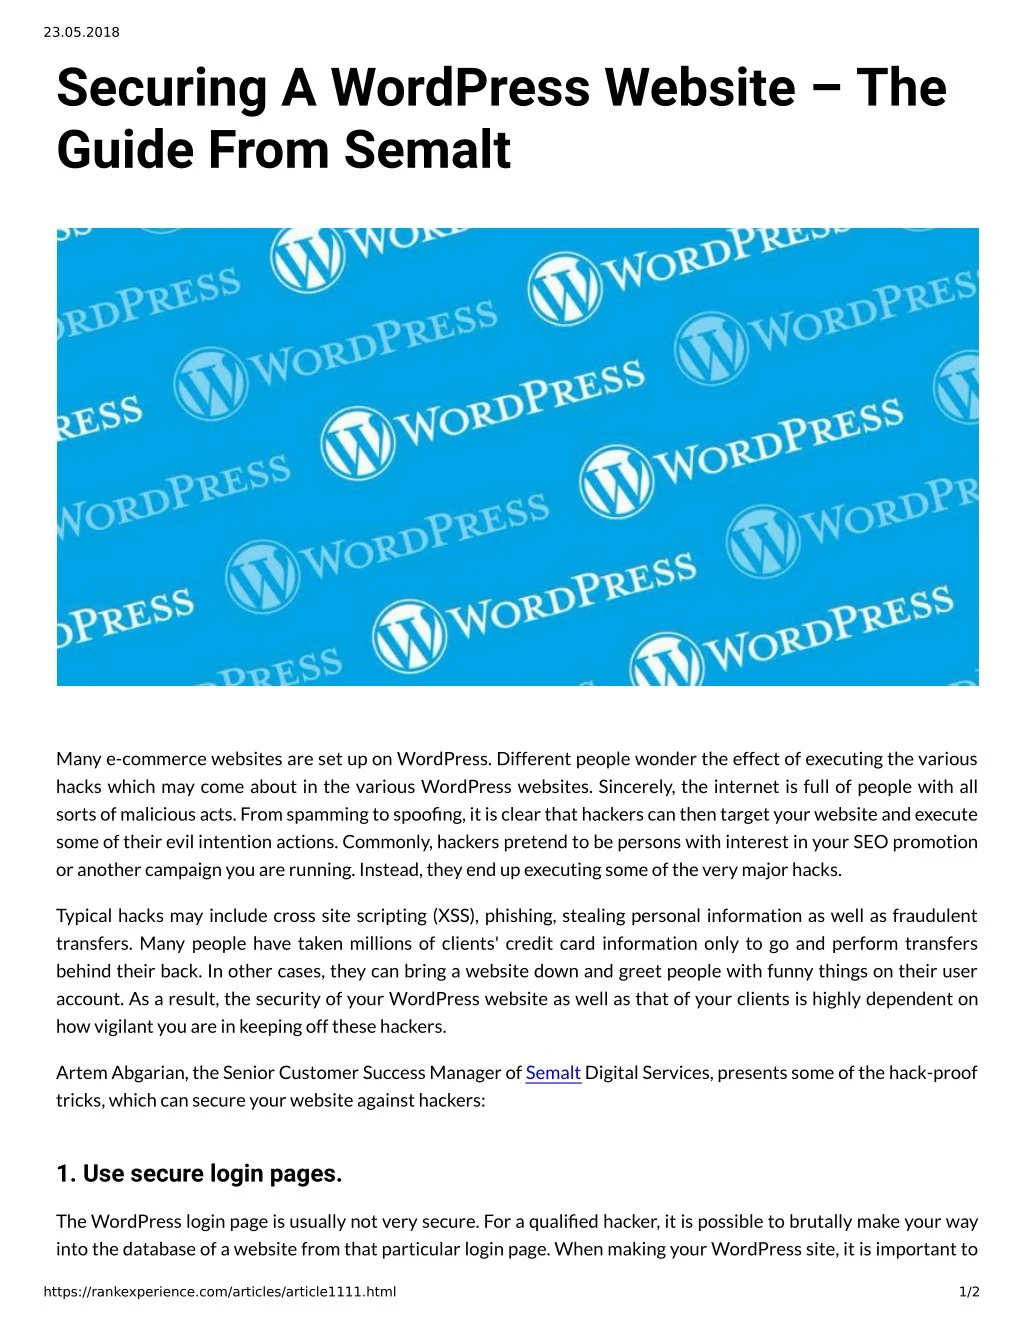 23 05 2018 securing a wordpress website the guide